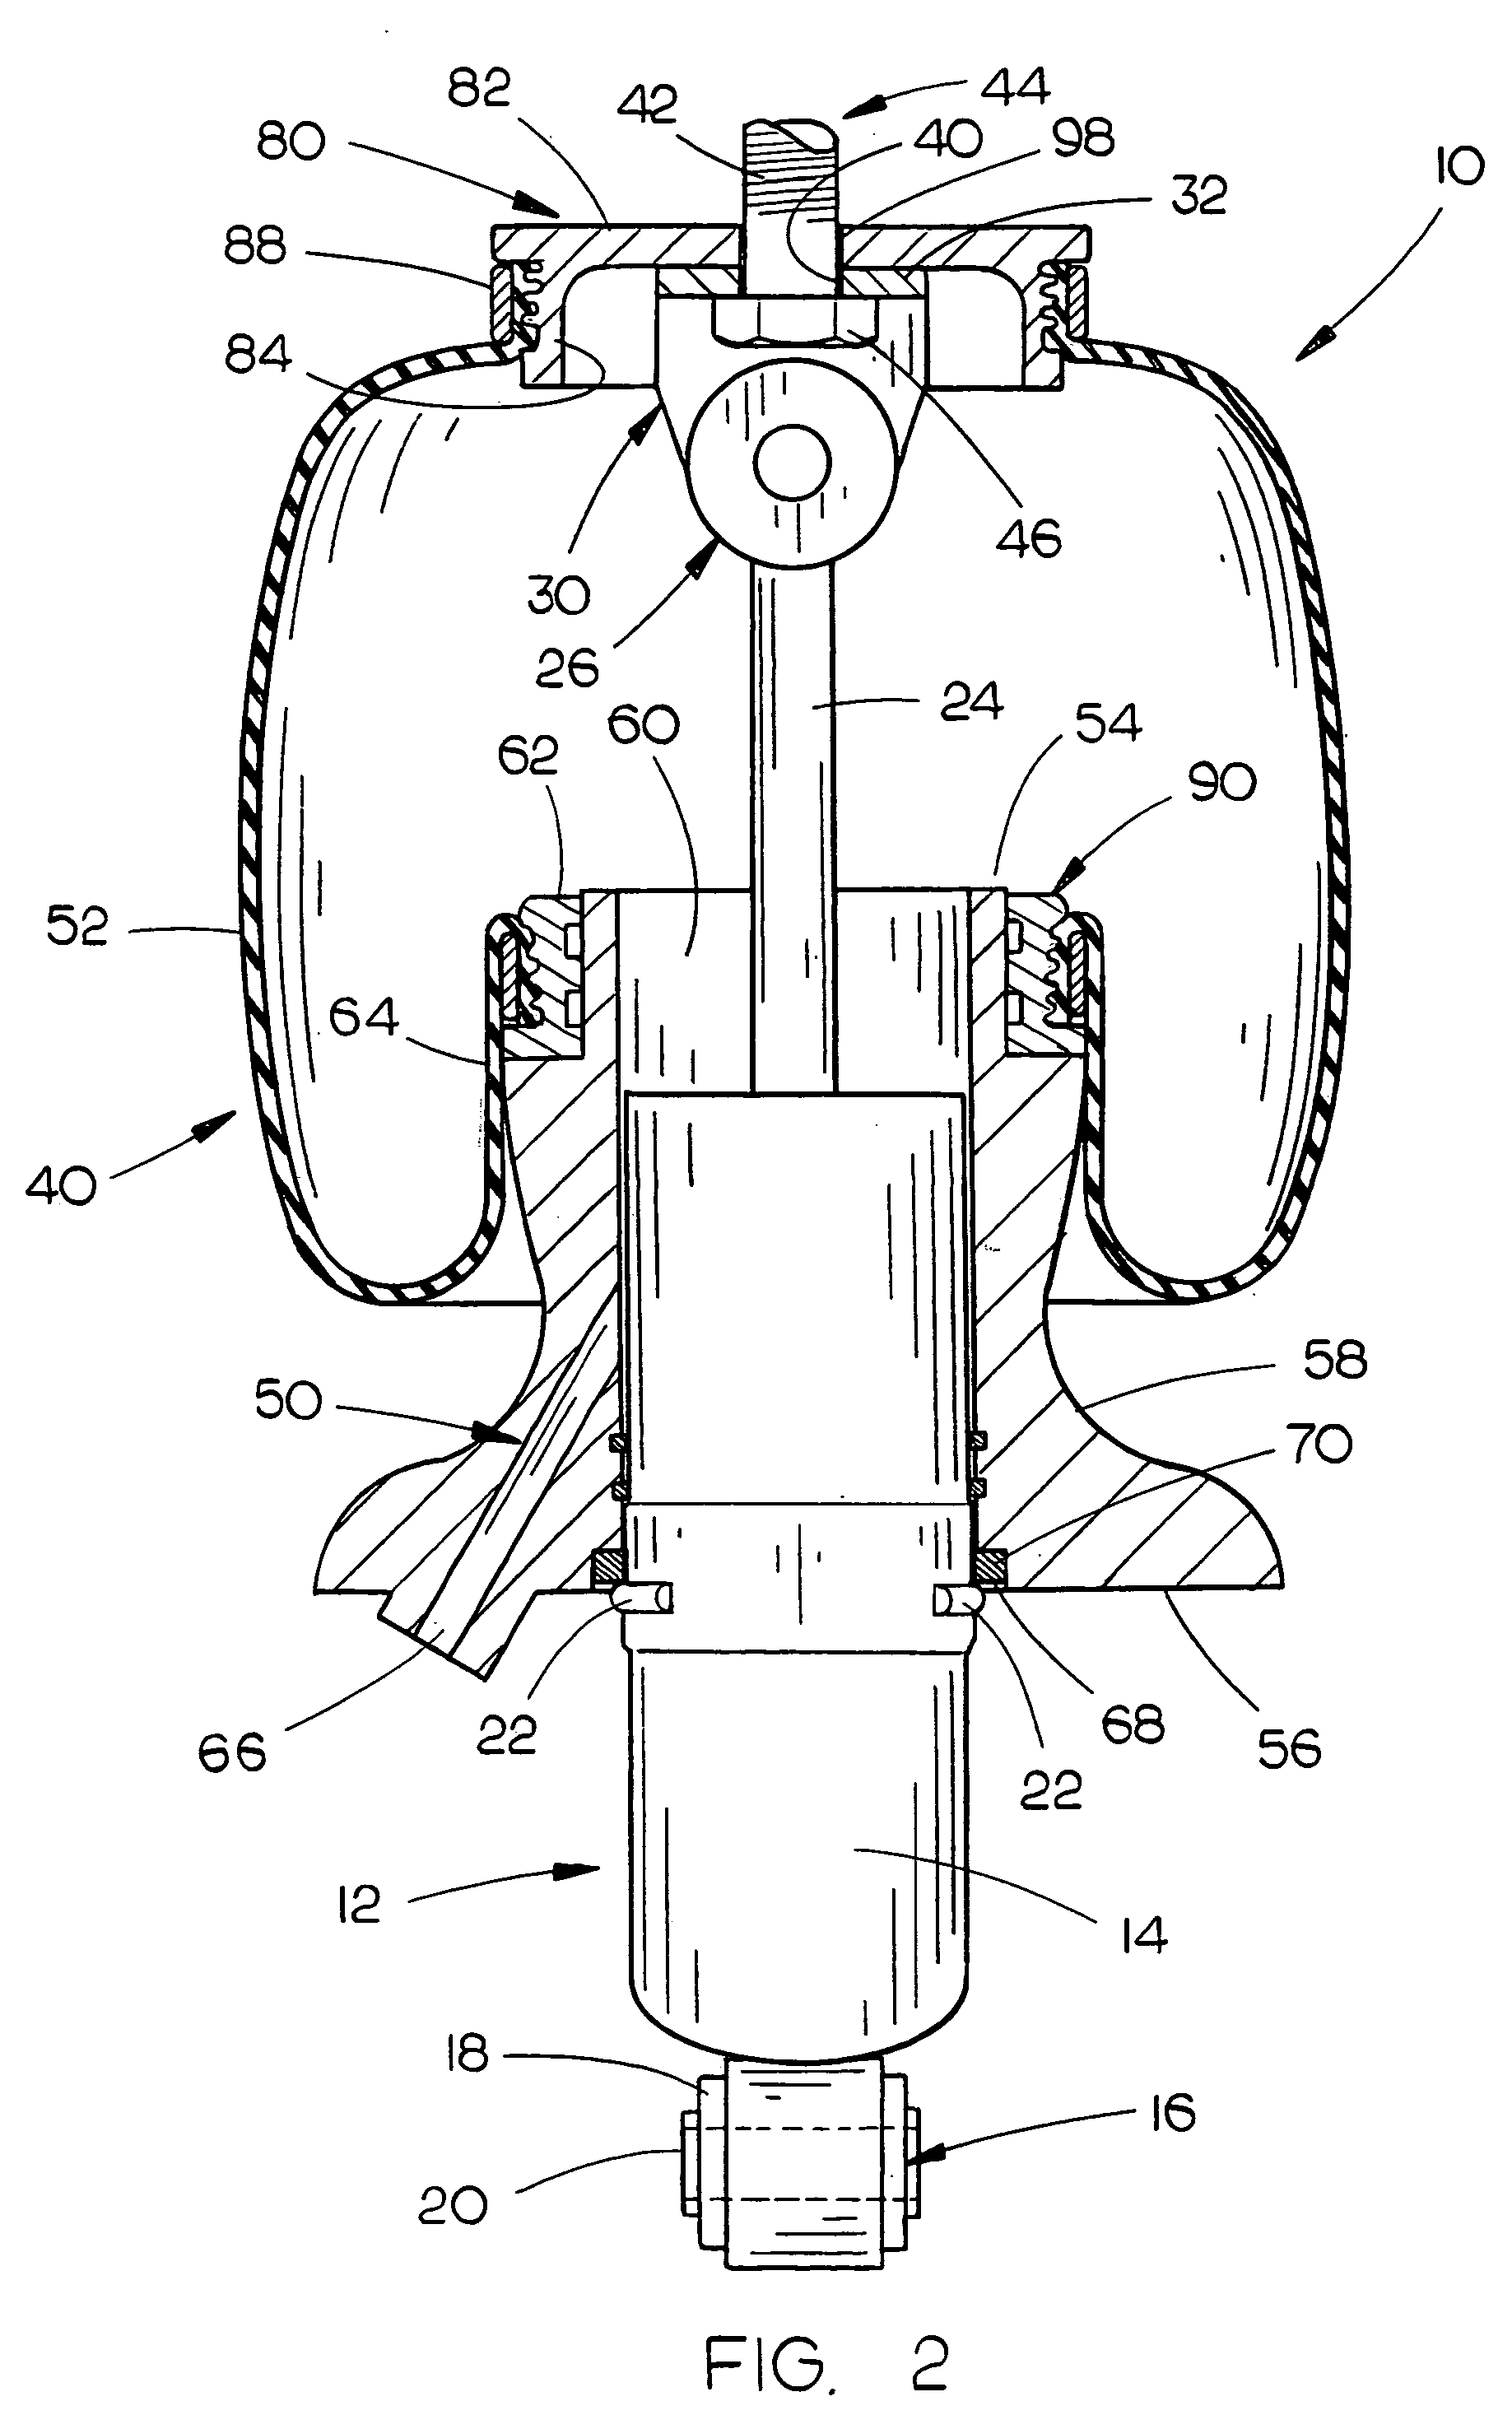 Air spring and shock absorber assembly for use in suspension systems